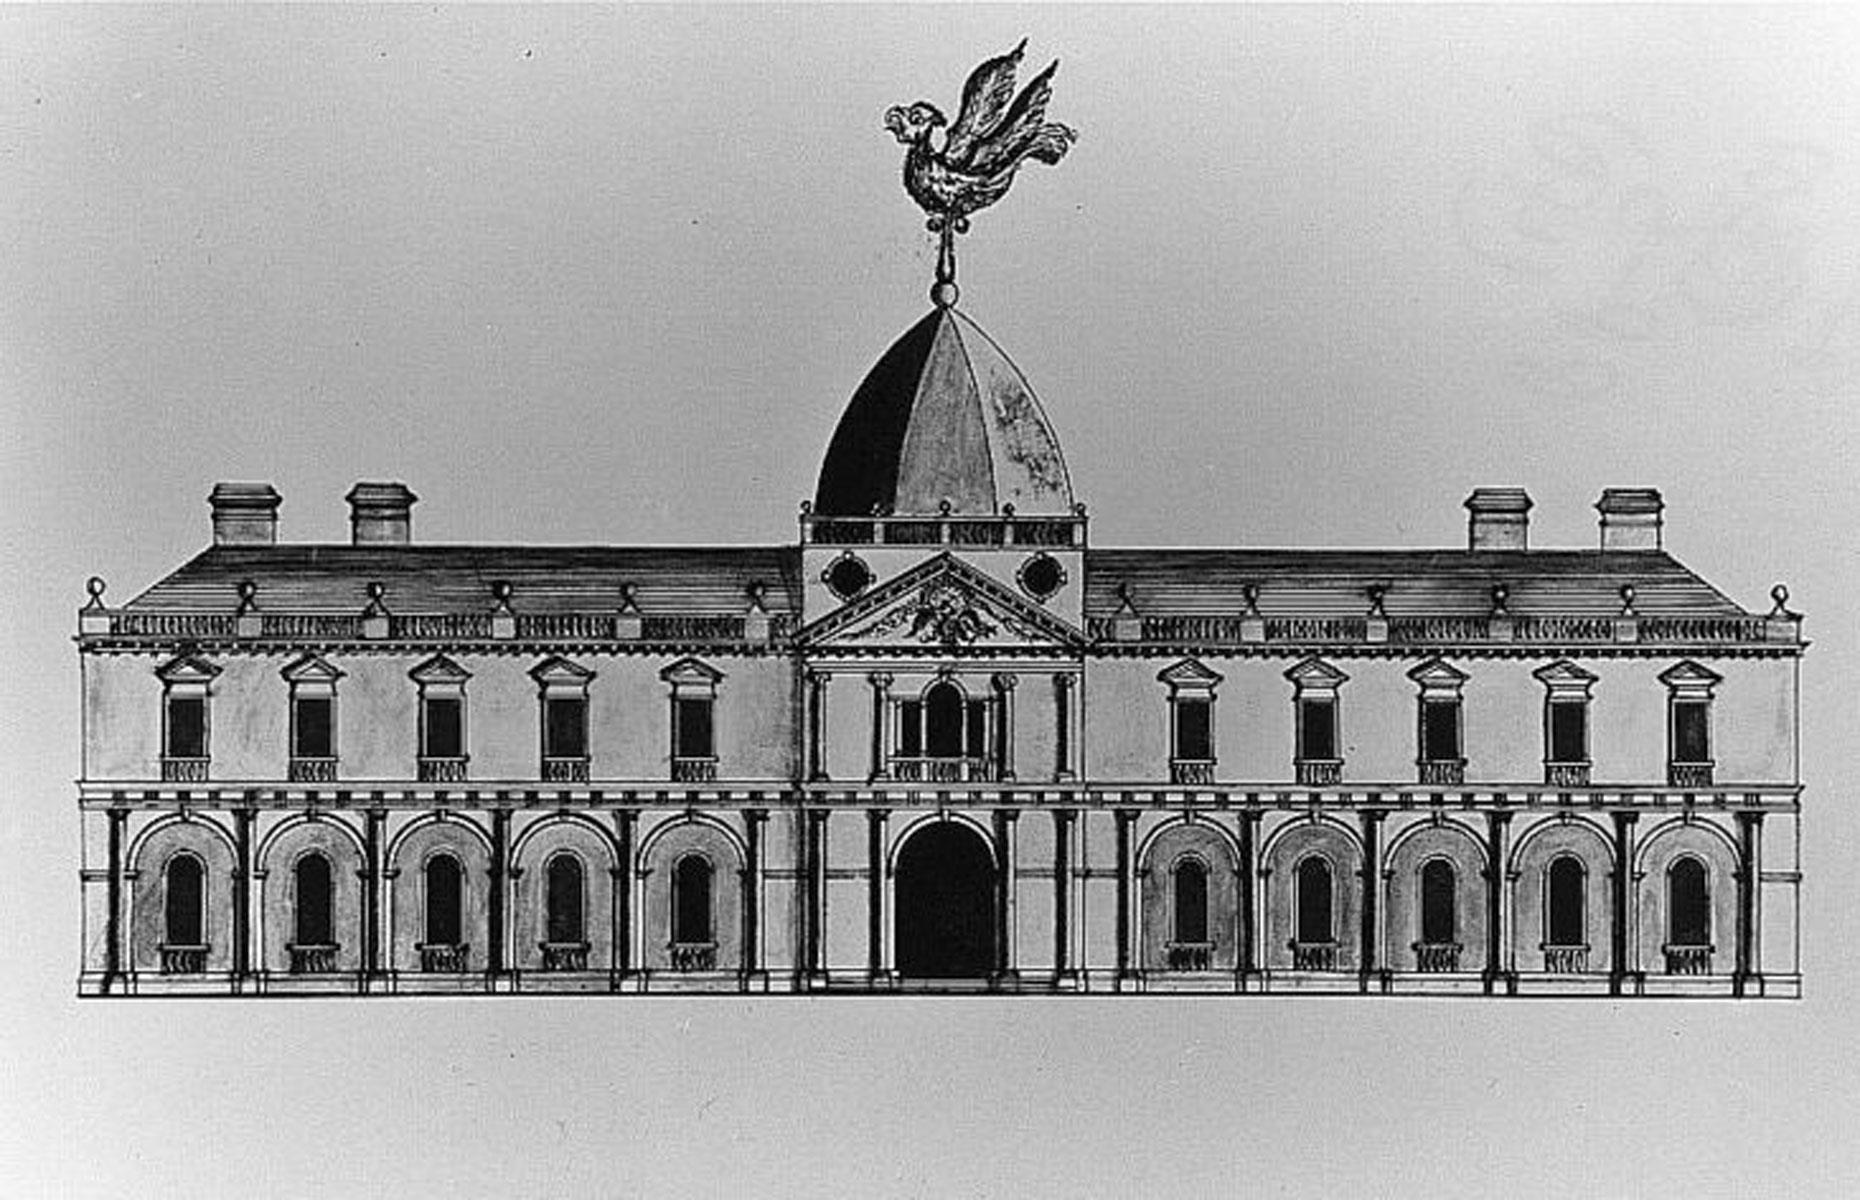 The dome was actually a later addition to the winning entry designed by architect William Thornton. Fortunately, Jefferson passed on this entry by amateur James Diamond, which features an eagle weathervane that looks like a giant chicken.